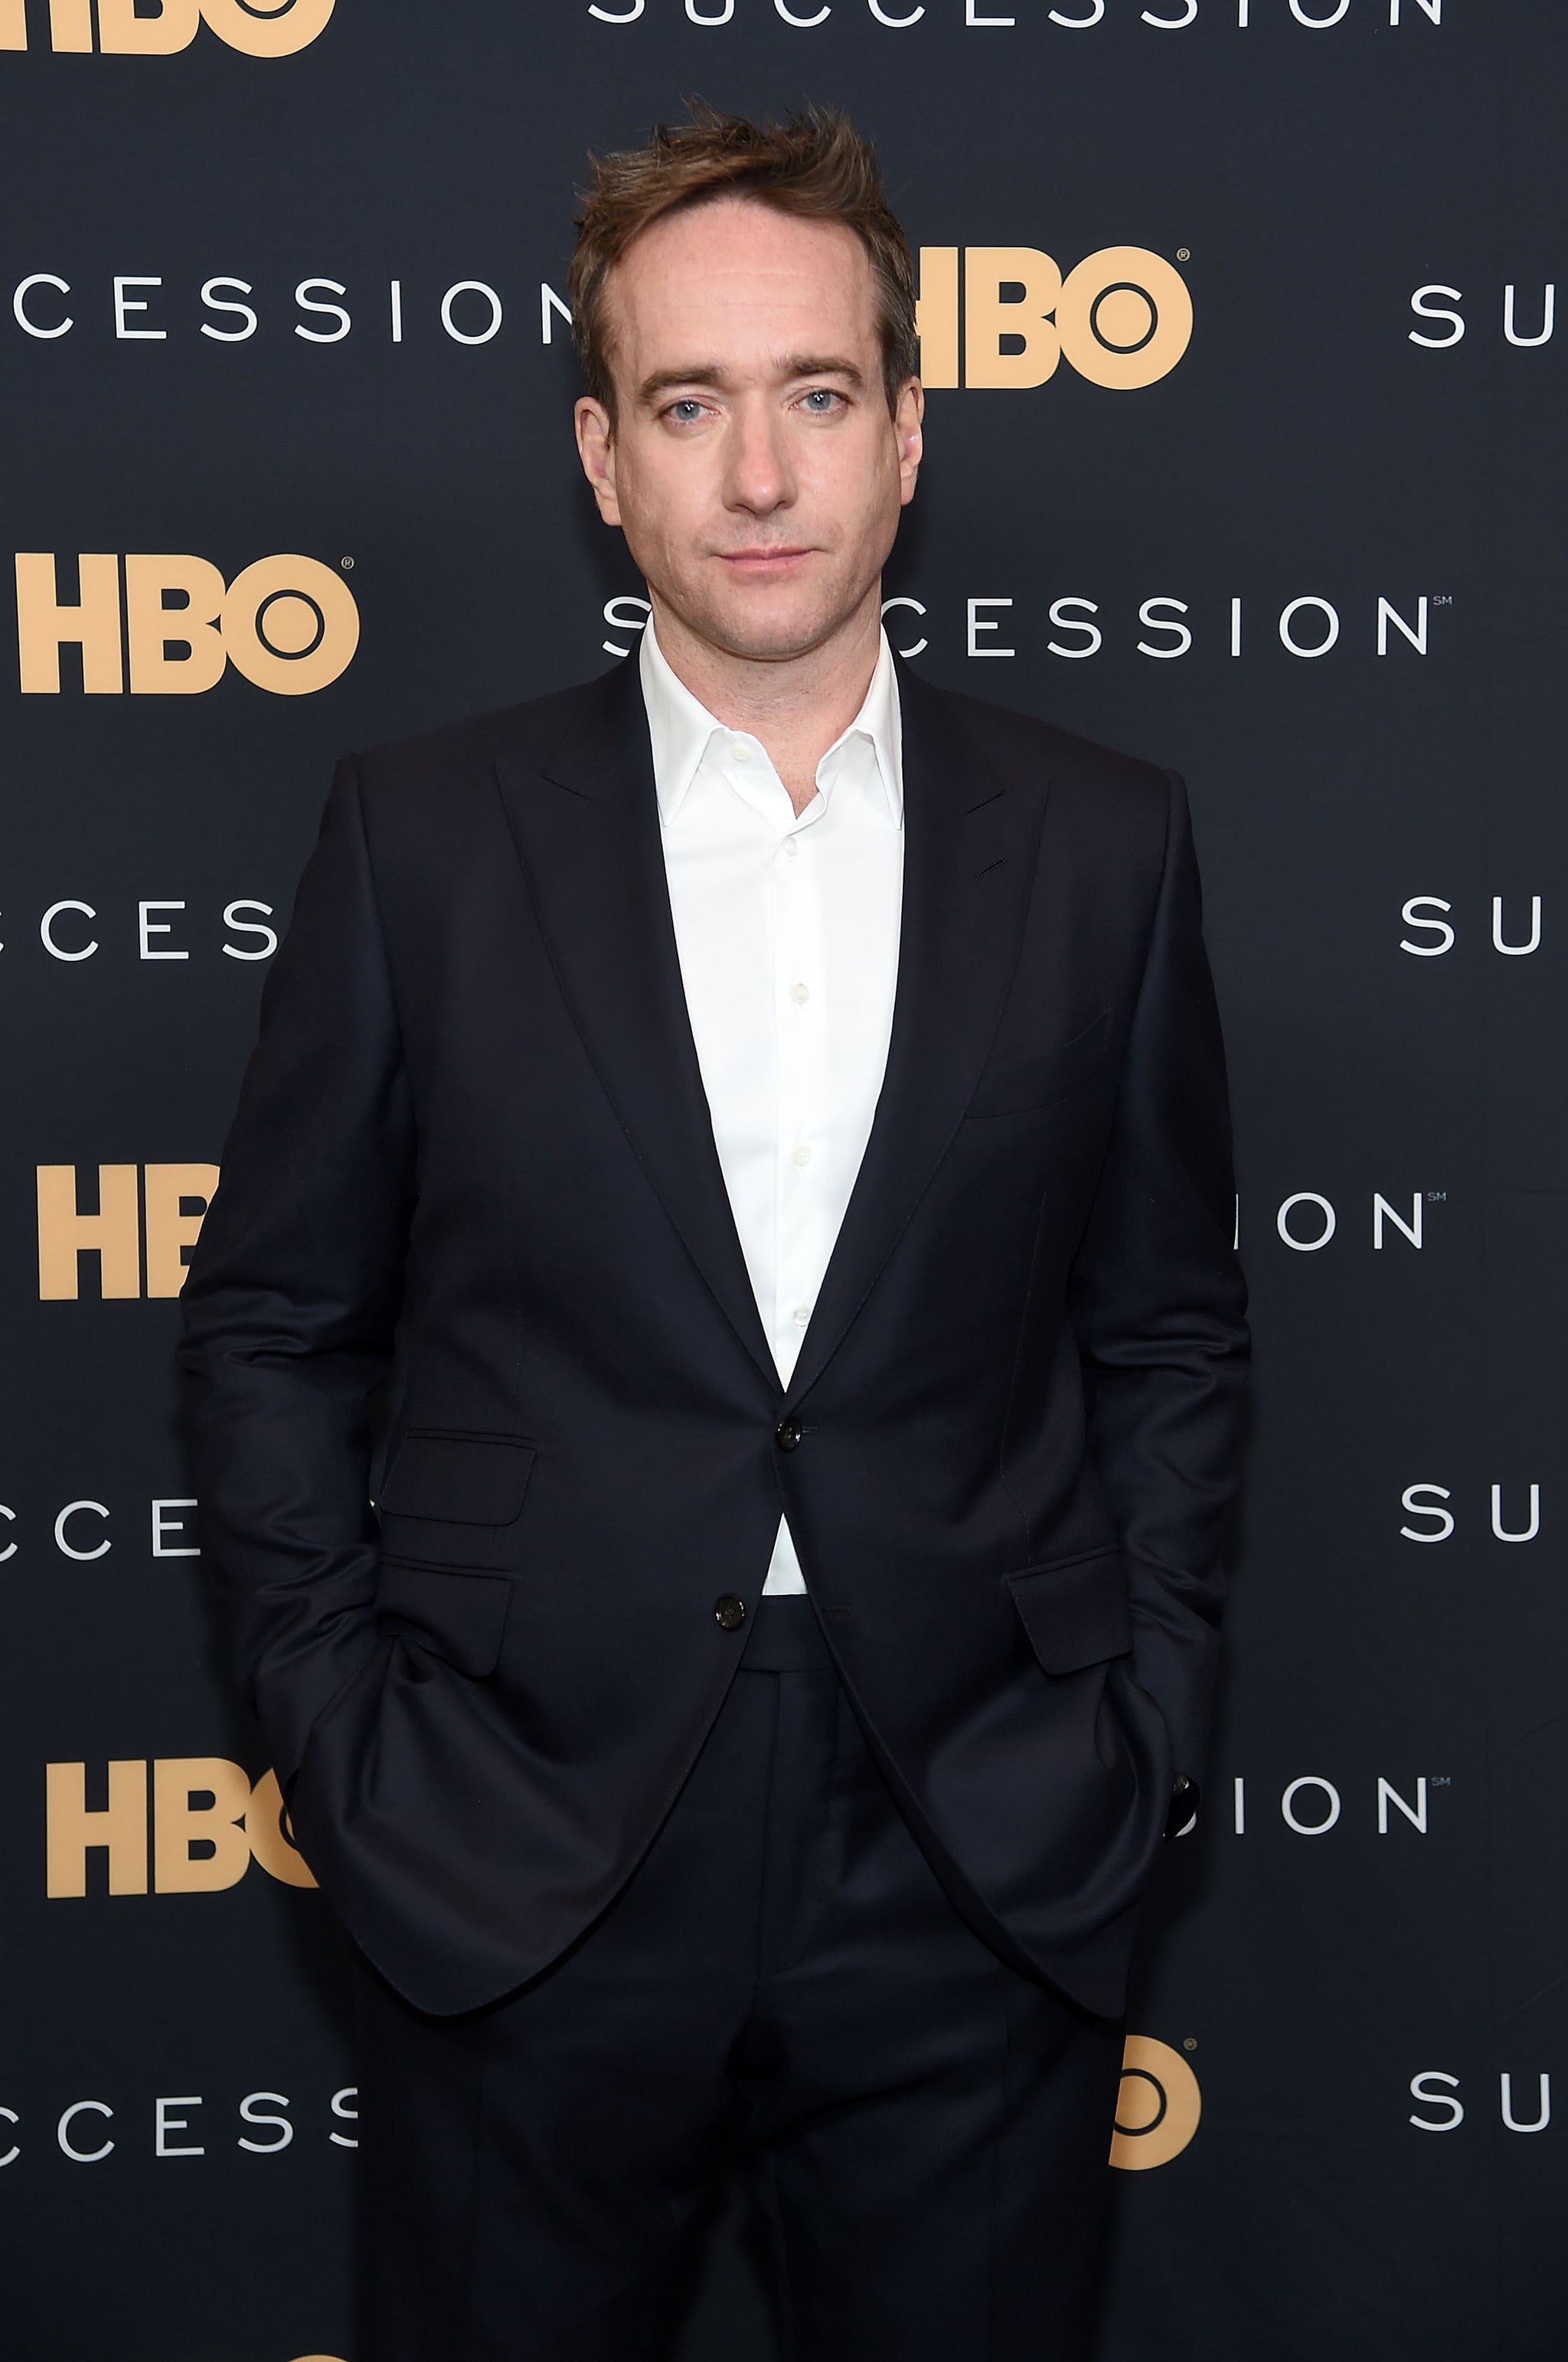 Matthew Macfadyen as Tom Wambsgans | The Succession 3 Cast Is Stacked! See Who's Joining and Returning | POPSUGAR Entertainment Photo 10